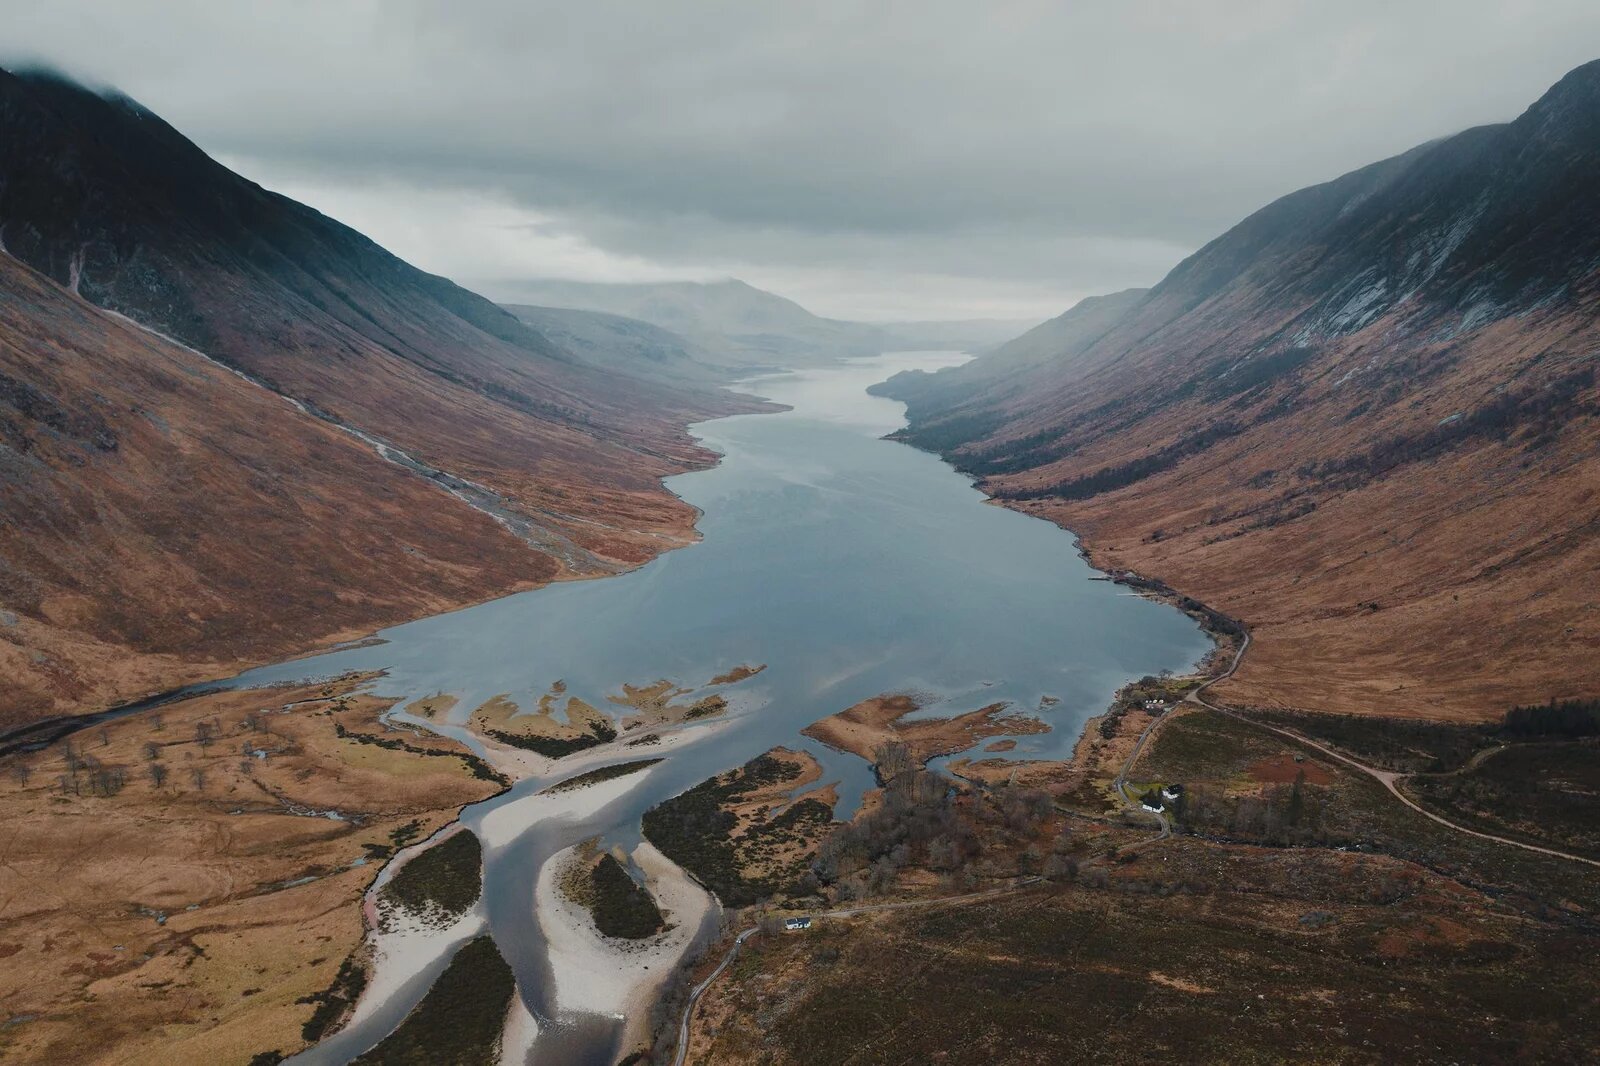 10 Extraordinary Facts About Loch Etive - Facts.net